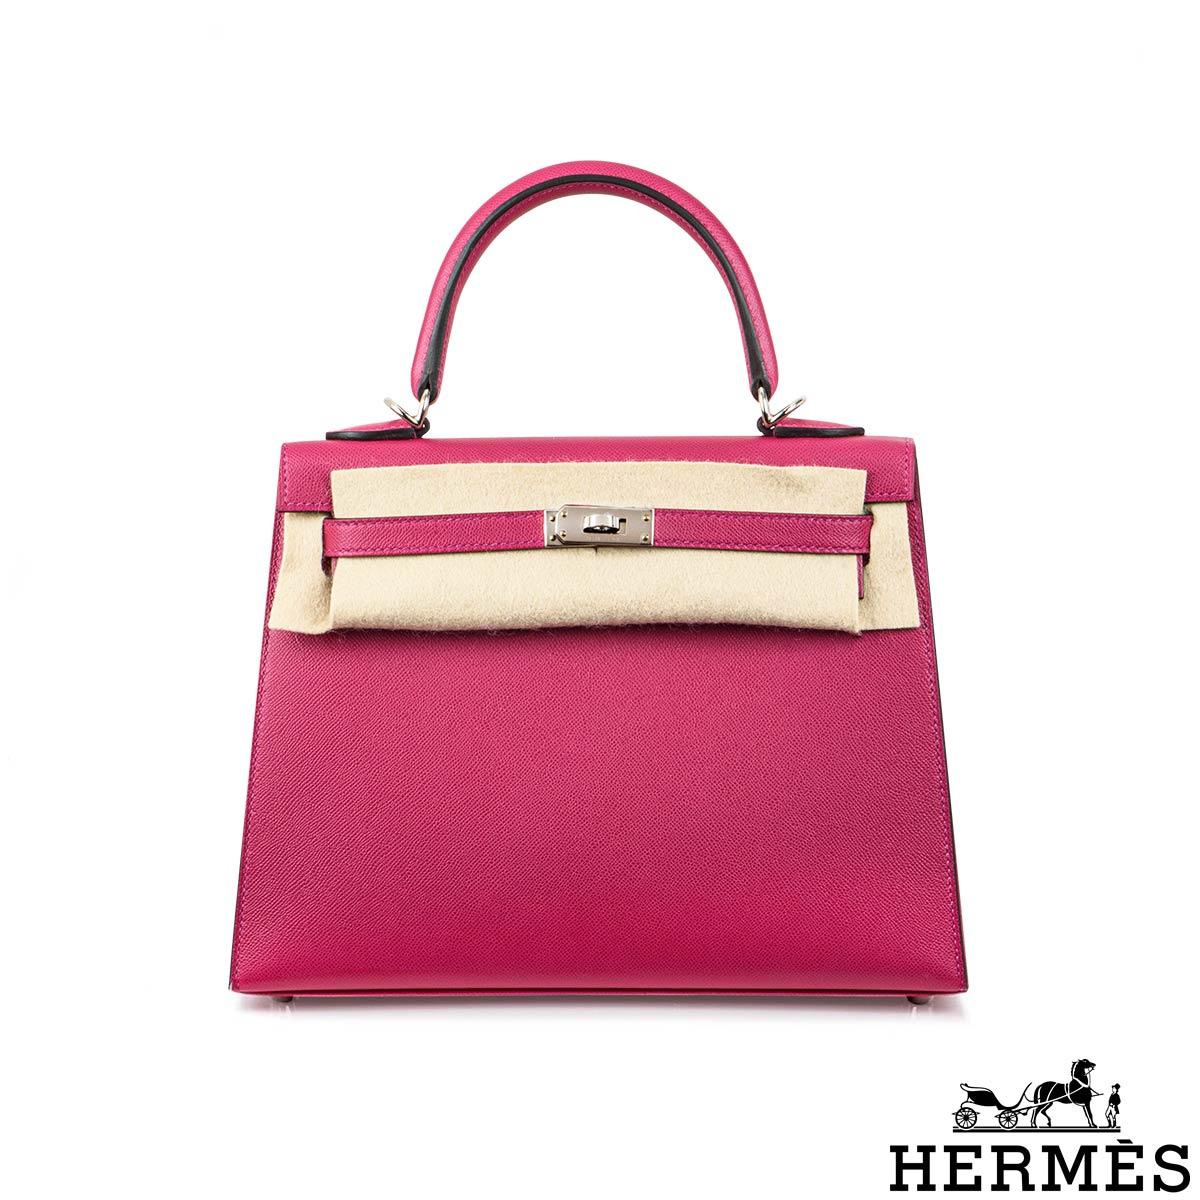 A spectacular Hermès 25cm Kelly Verso bag. The exterior of this Kelly Verso features a Sellier style in Rose Pourpre Veau Madame leather. The Rose Pourpre Madame leather is complemented with palladium hardware and tonal stitchings. It features a